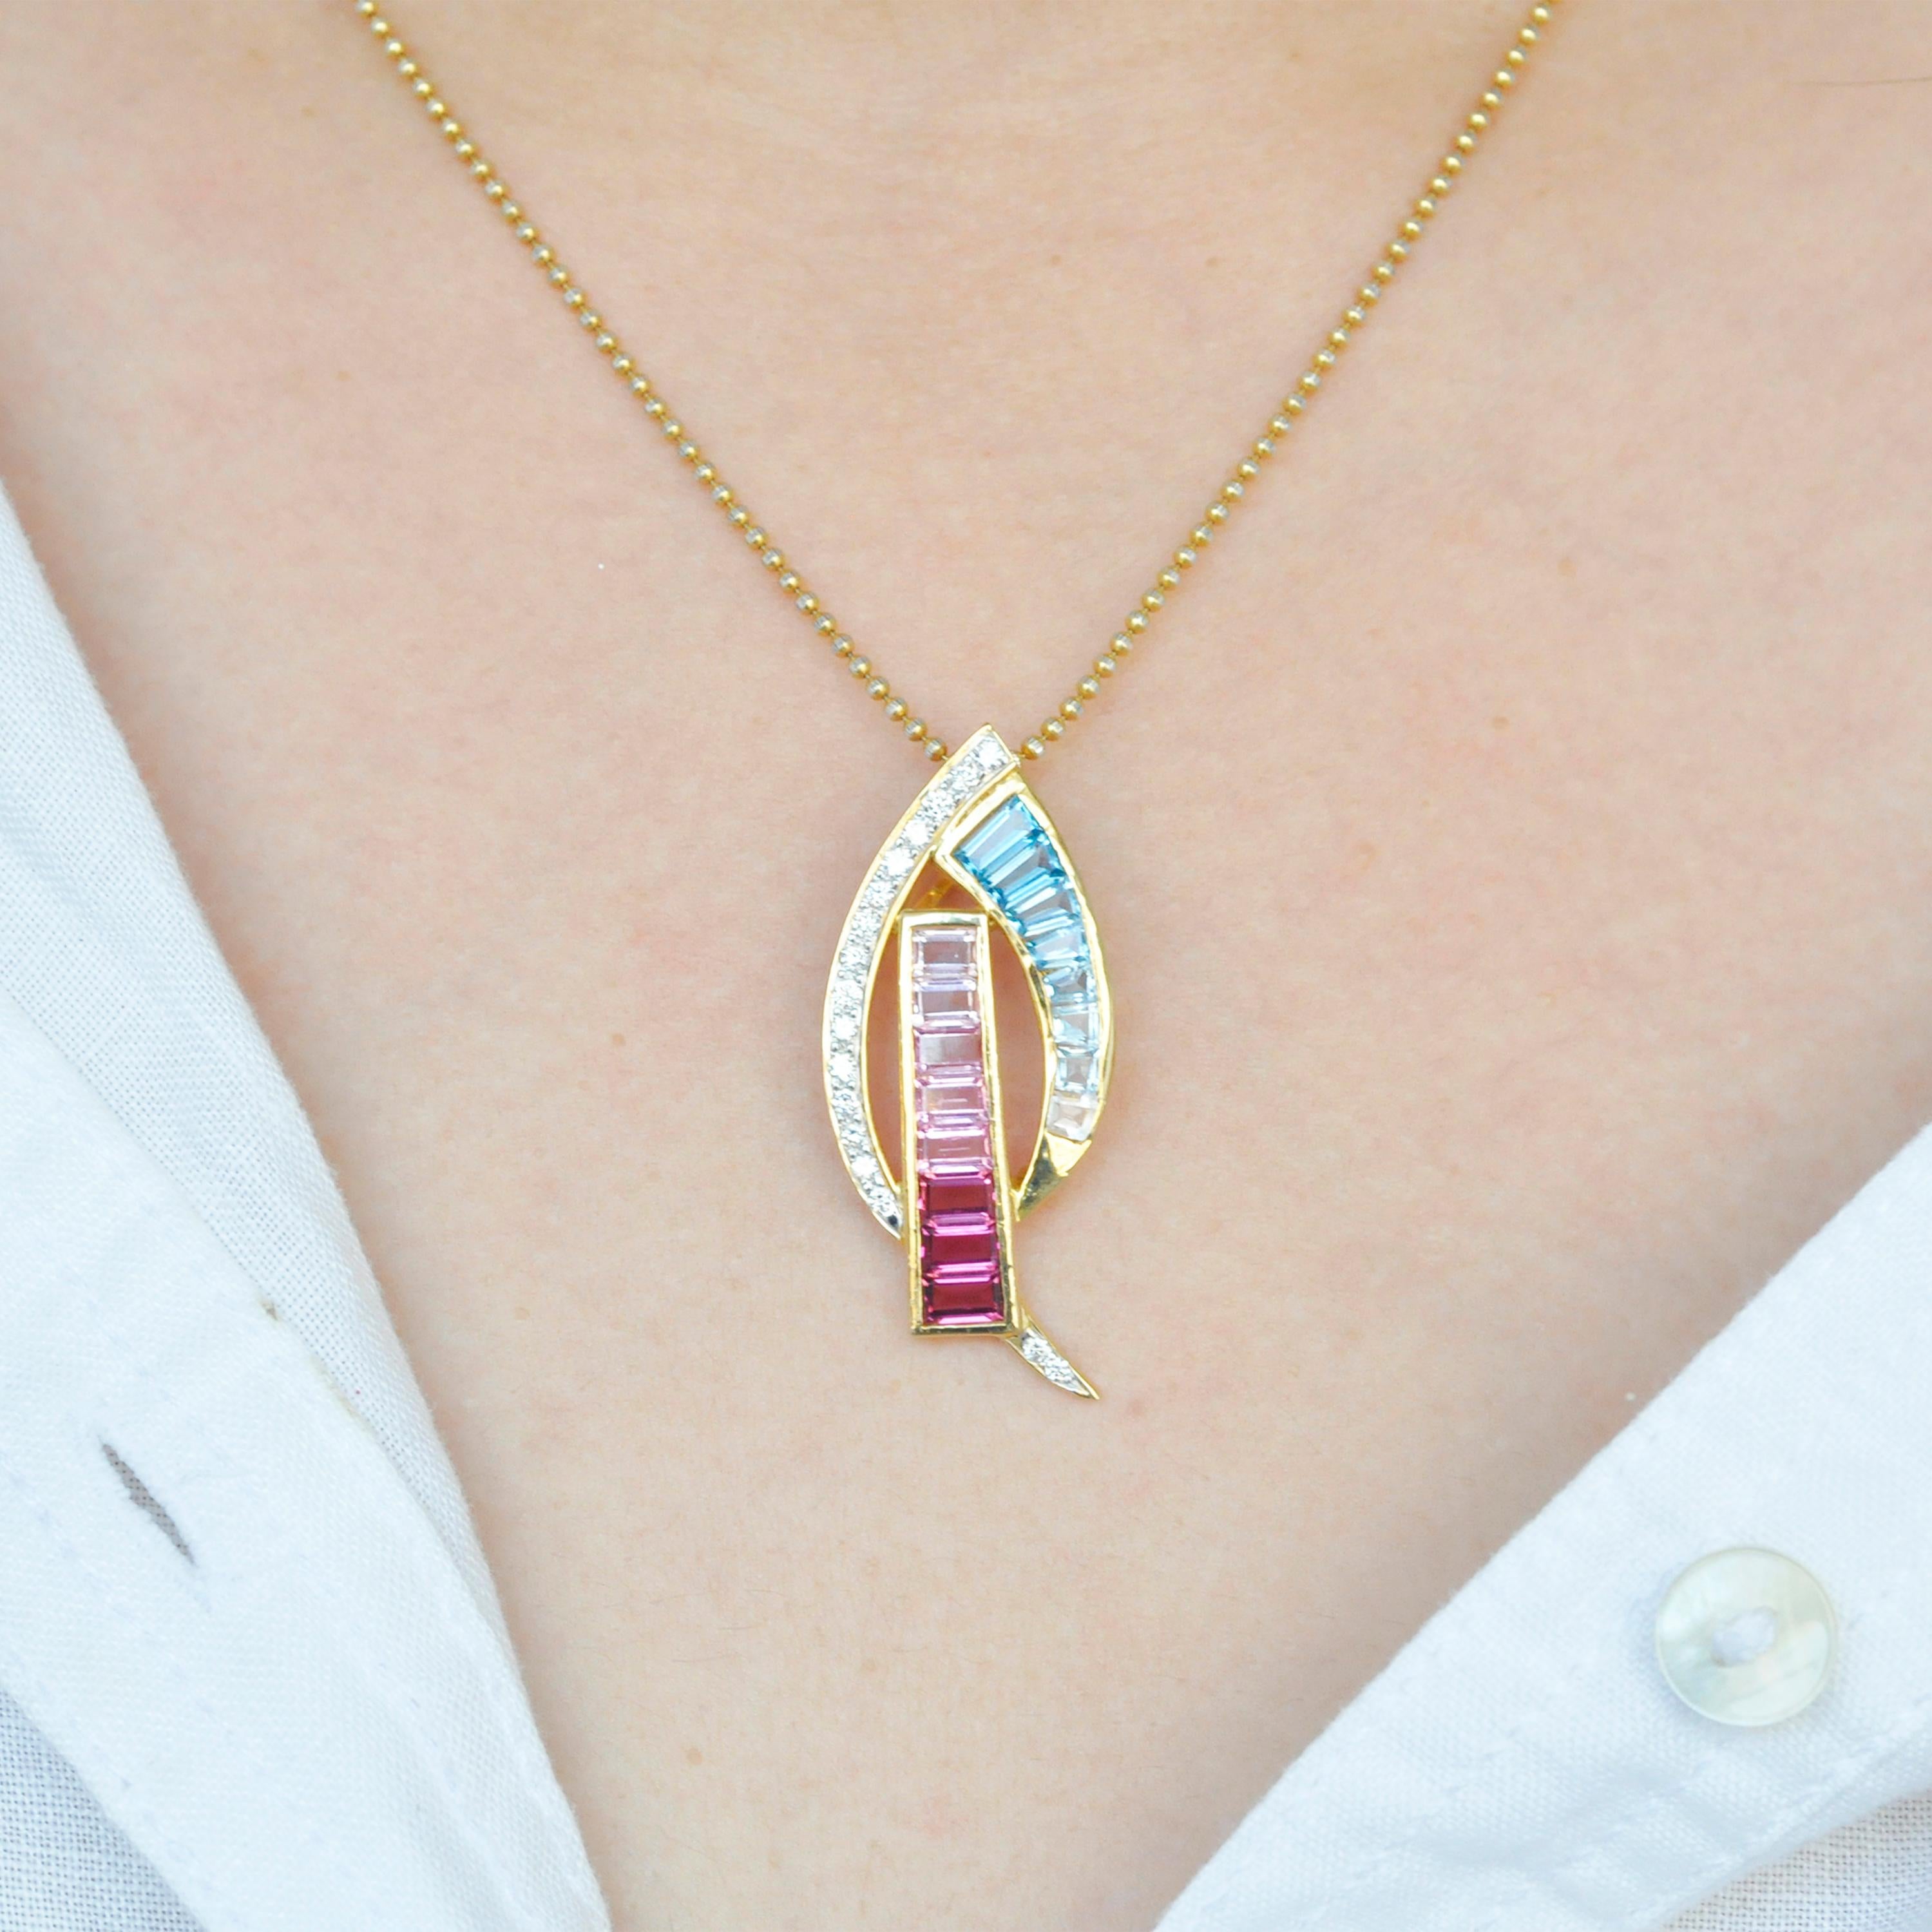 18 karat yellow gold taper baguette pink tourmaline aquamarine diamond pendant necklace

This splendid piece of jewel is exquisite. In this pendant pink tourmalines and aquamarines are perfectly graded from dark to light and set in this 18 karat